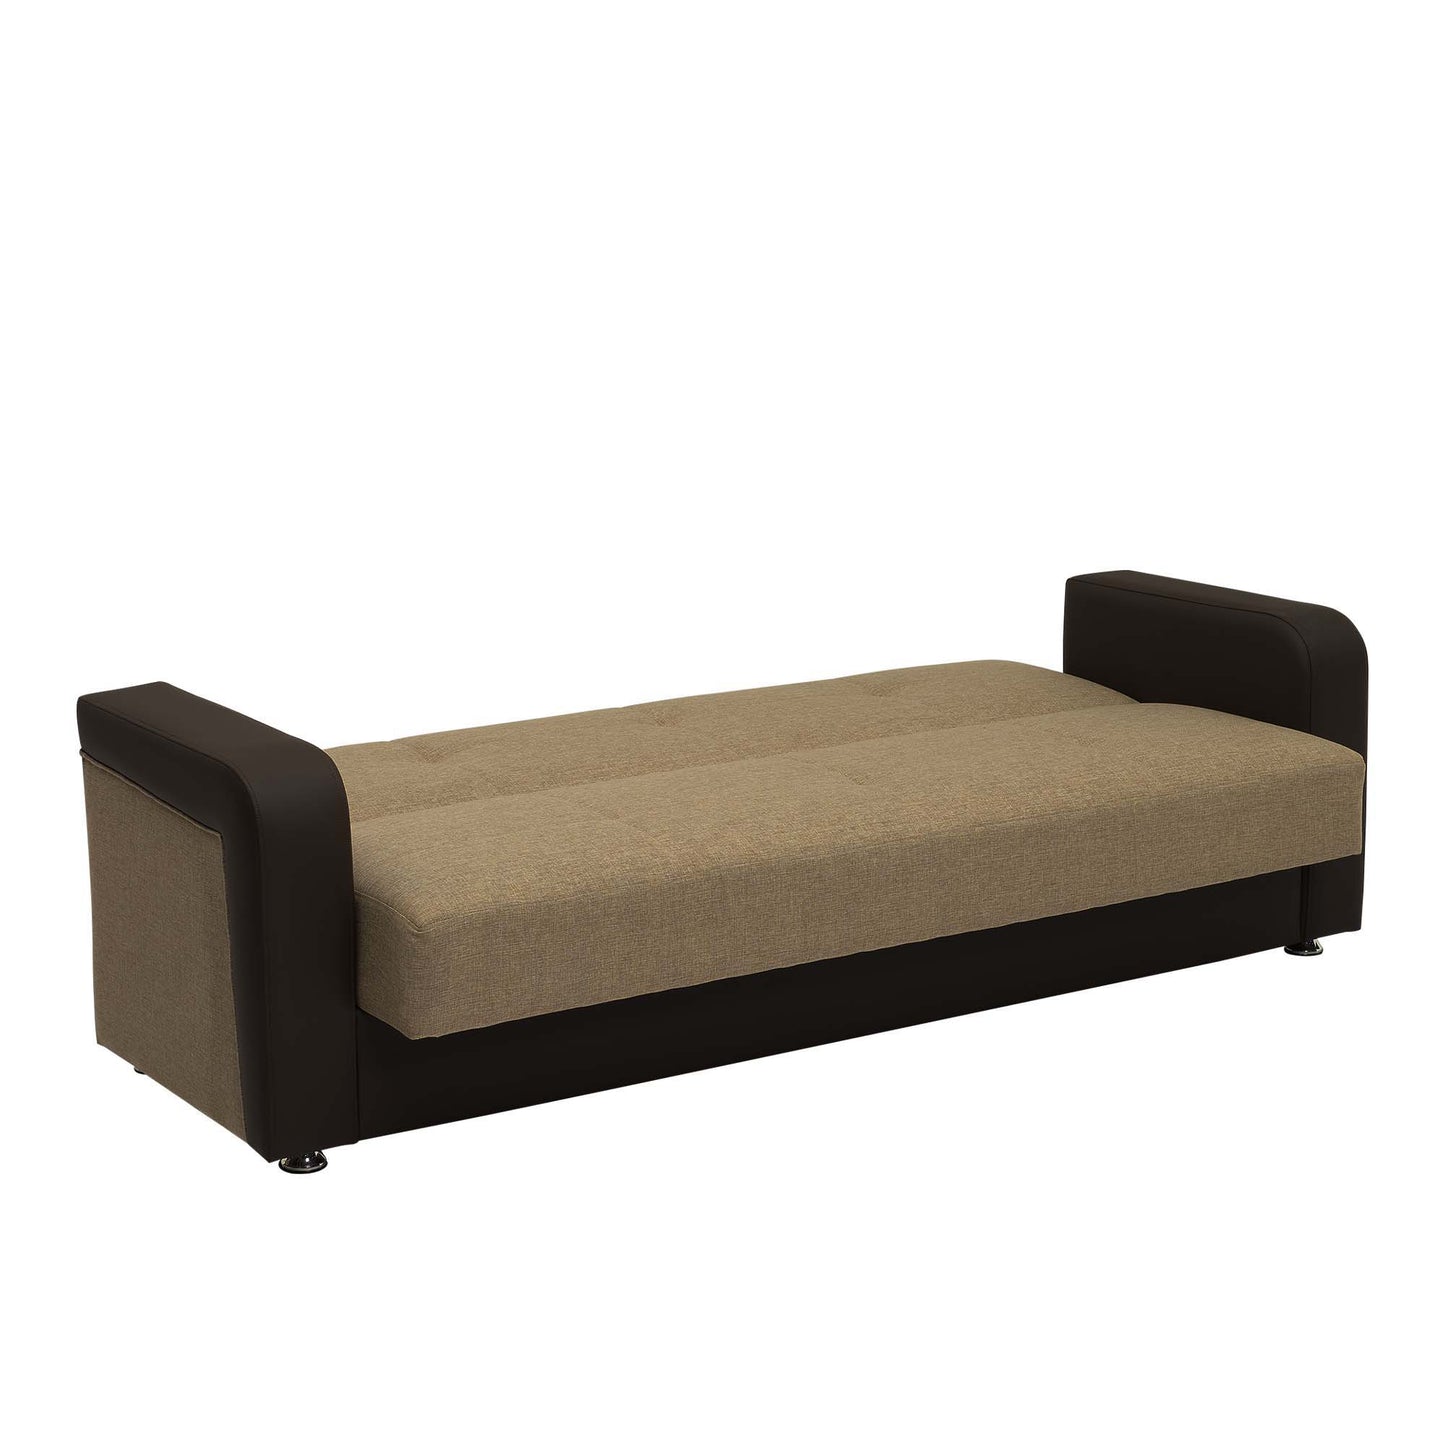 Ottomanson Harmony - Convertible Sofabed With Storage